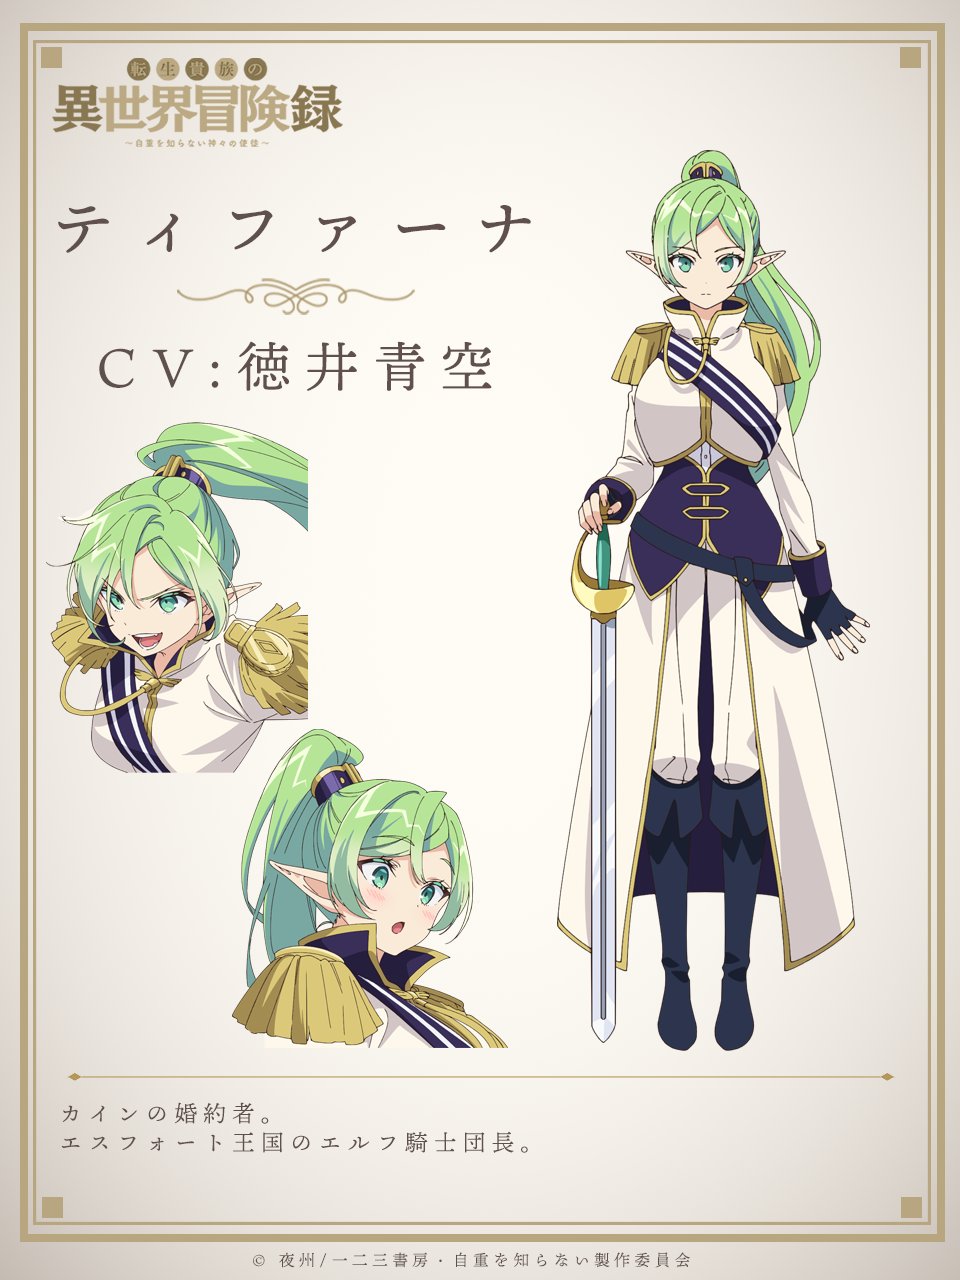 A character setting of Tifuana from the upcoming The Aristocrat's Otherworldly Adventure: Serving Gods Who Go Too Far TV anime. Tifuana is a statuesque eleven woman with long light green hair in a ponytail and green eyes. She wears a white military great coat with golden tassel epaulettes at the shoulders and dark blue knee high boots and she carries a broadsword with a cutlass grip.